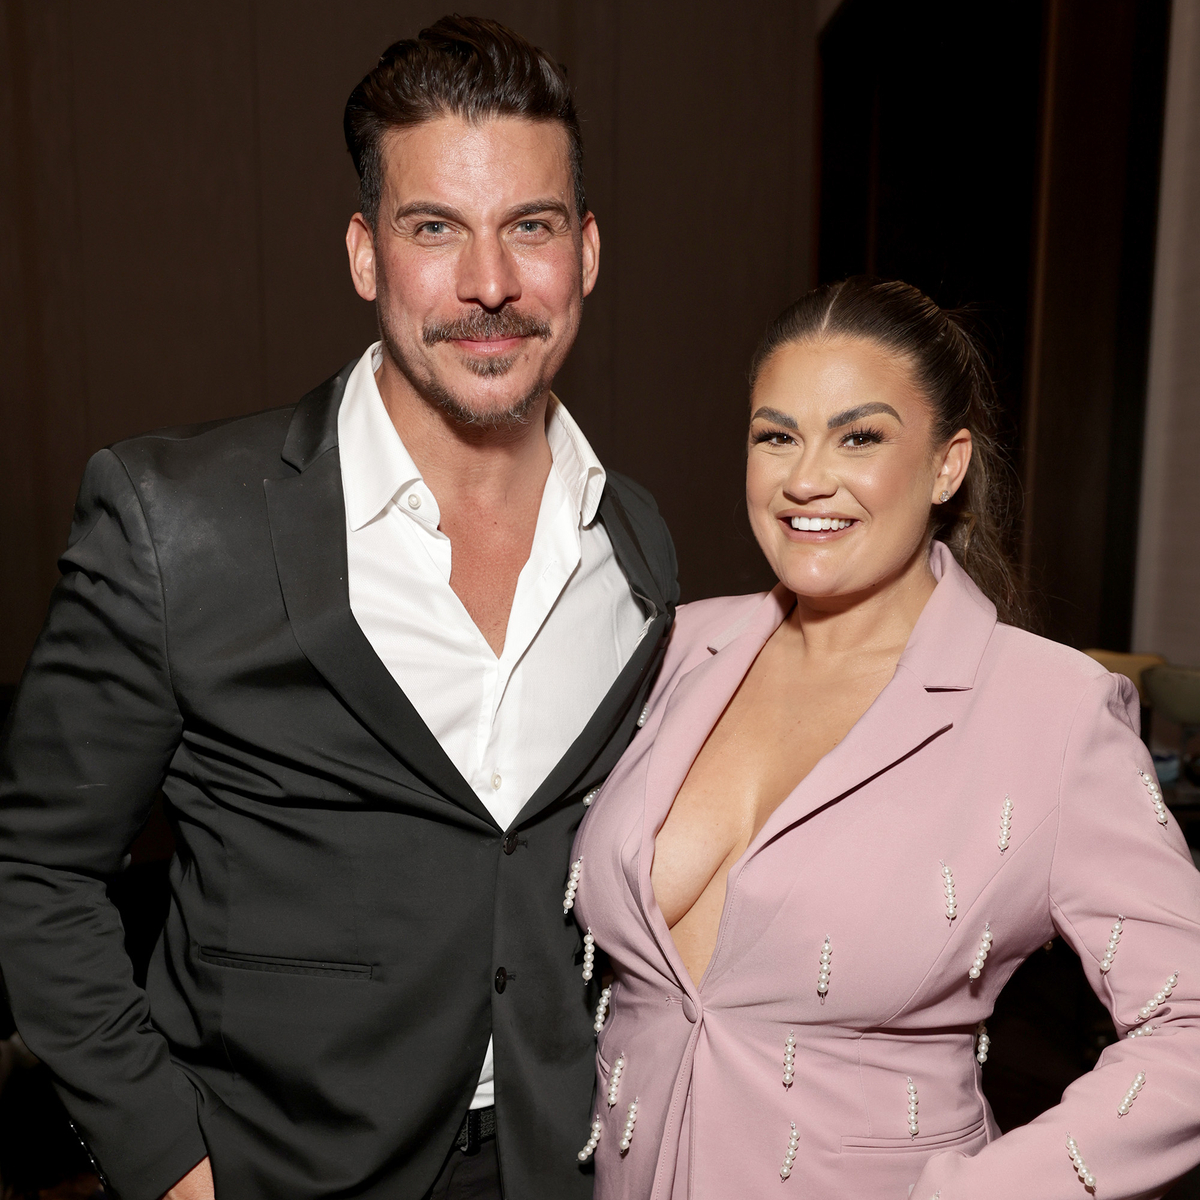 Vanderpump Rules’ Brittany Cartwright Posts Cryptic Message on Power After Jax Taylor Separation